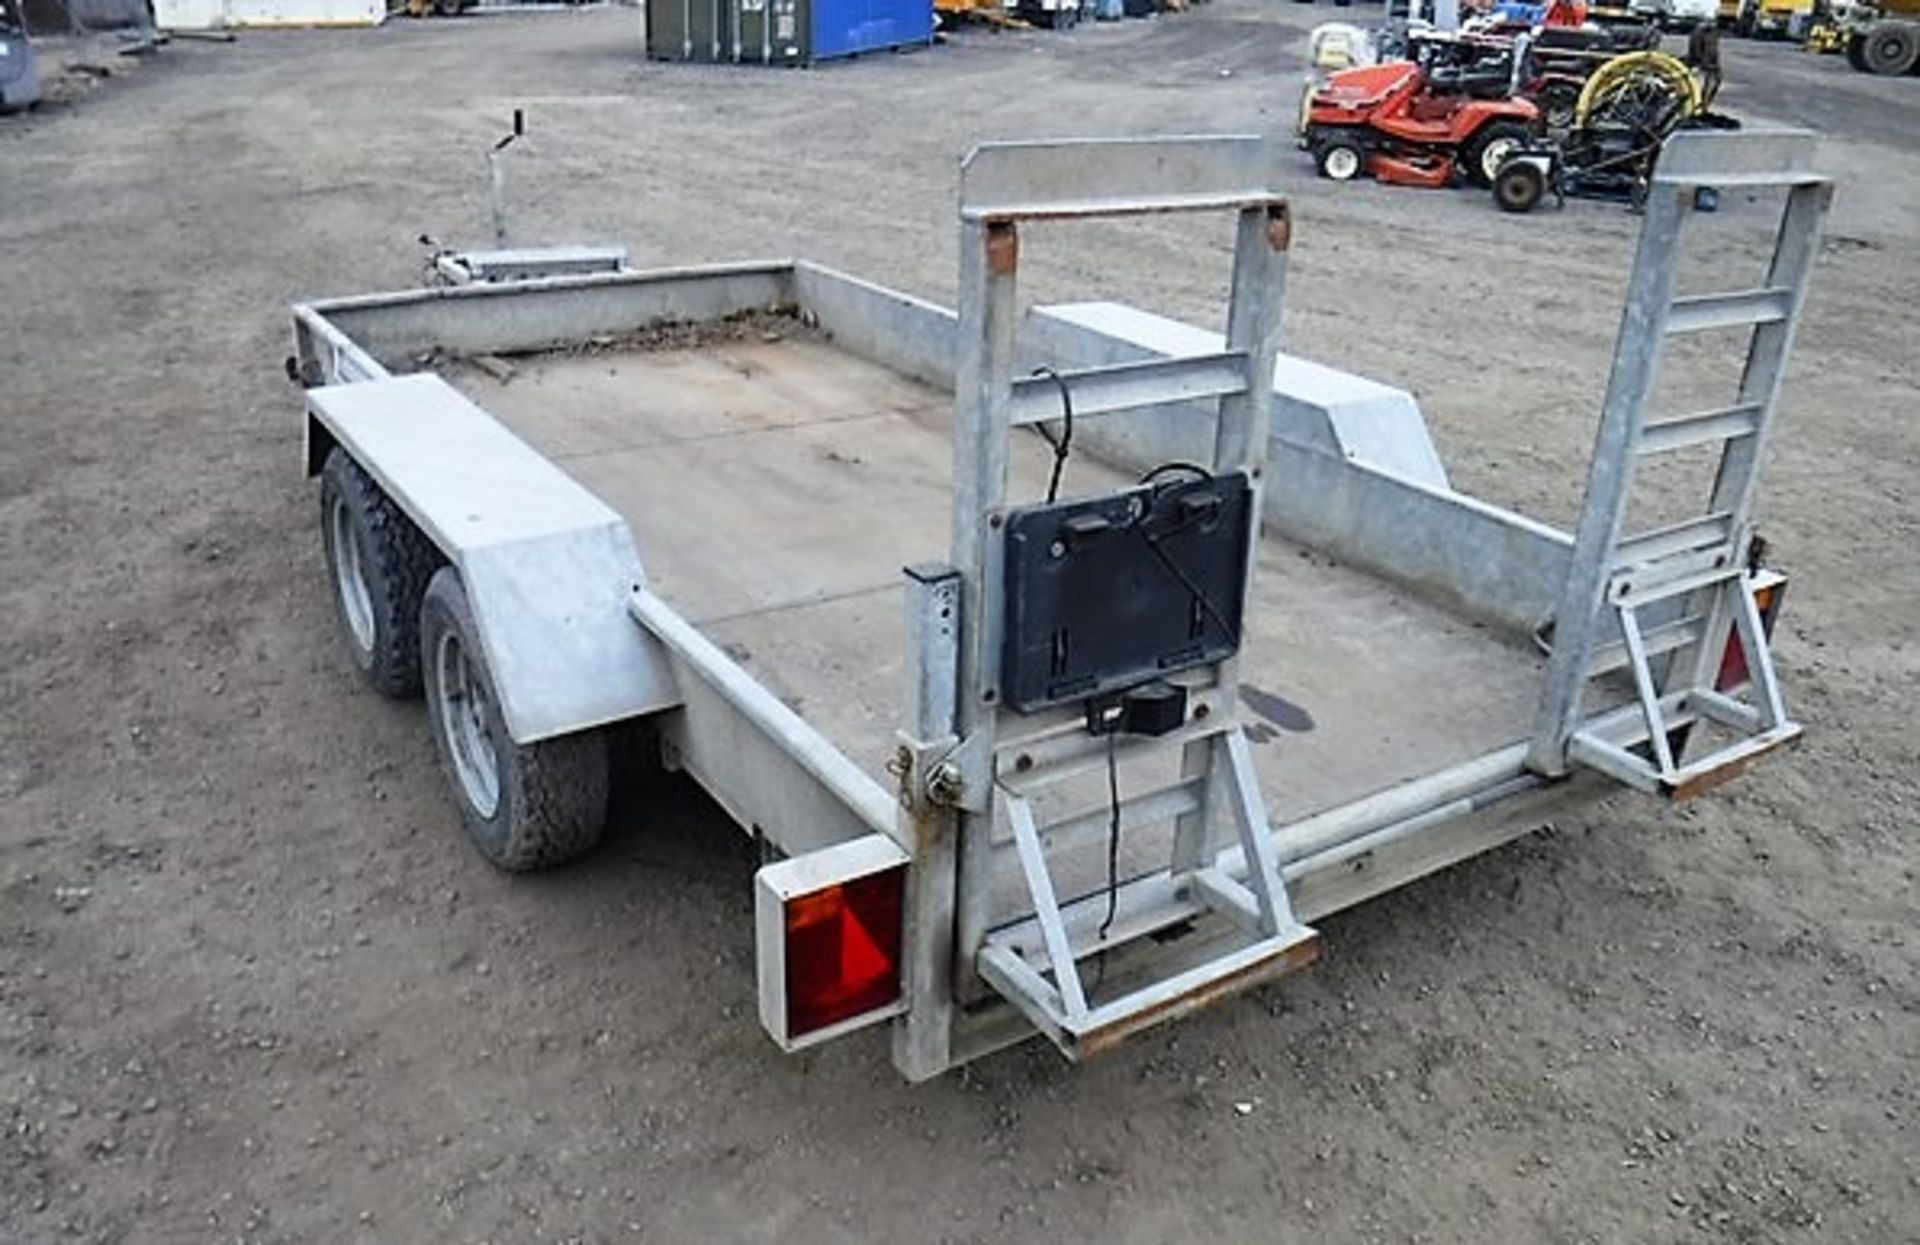 INDEPSENSION 12&#39; x 6&#39; twin axle plant trailer c/w steel ramps. Asset No P830002 S/ - Image 2 of 4